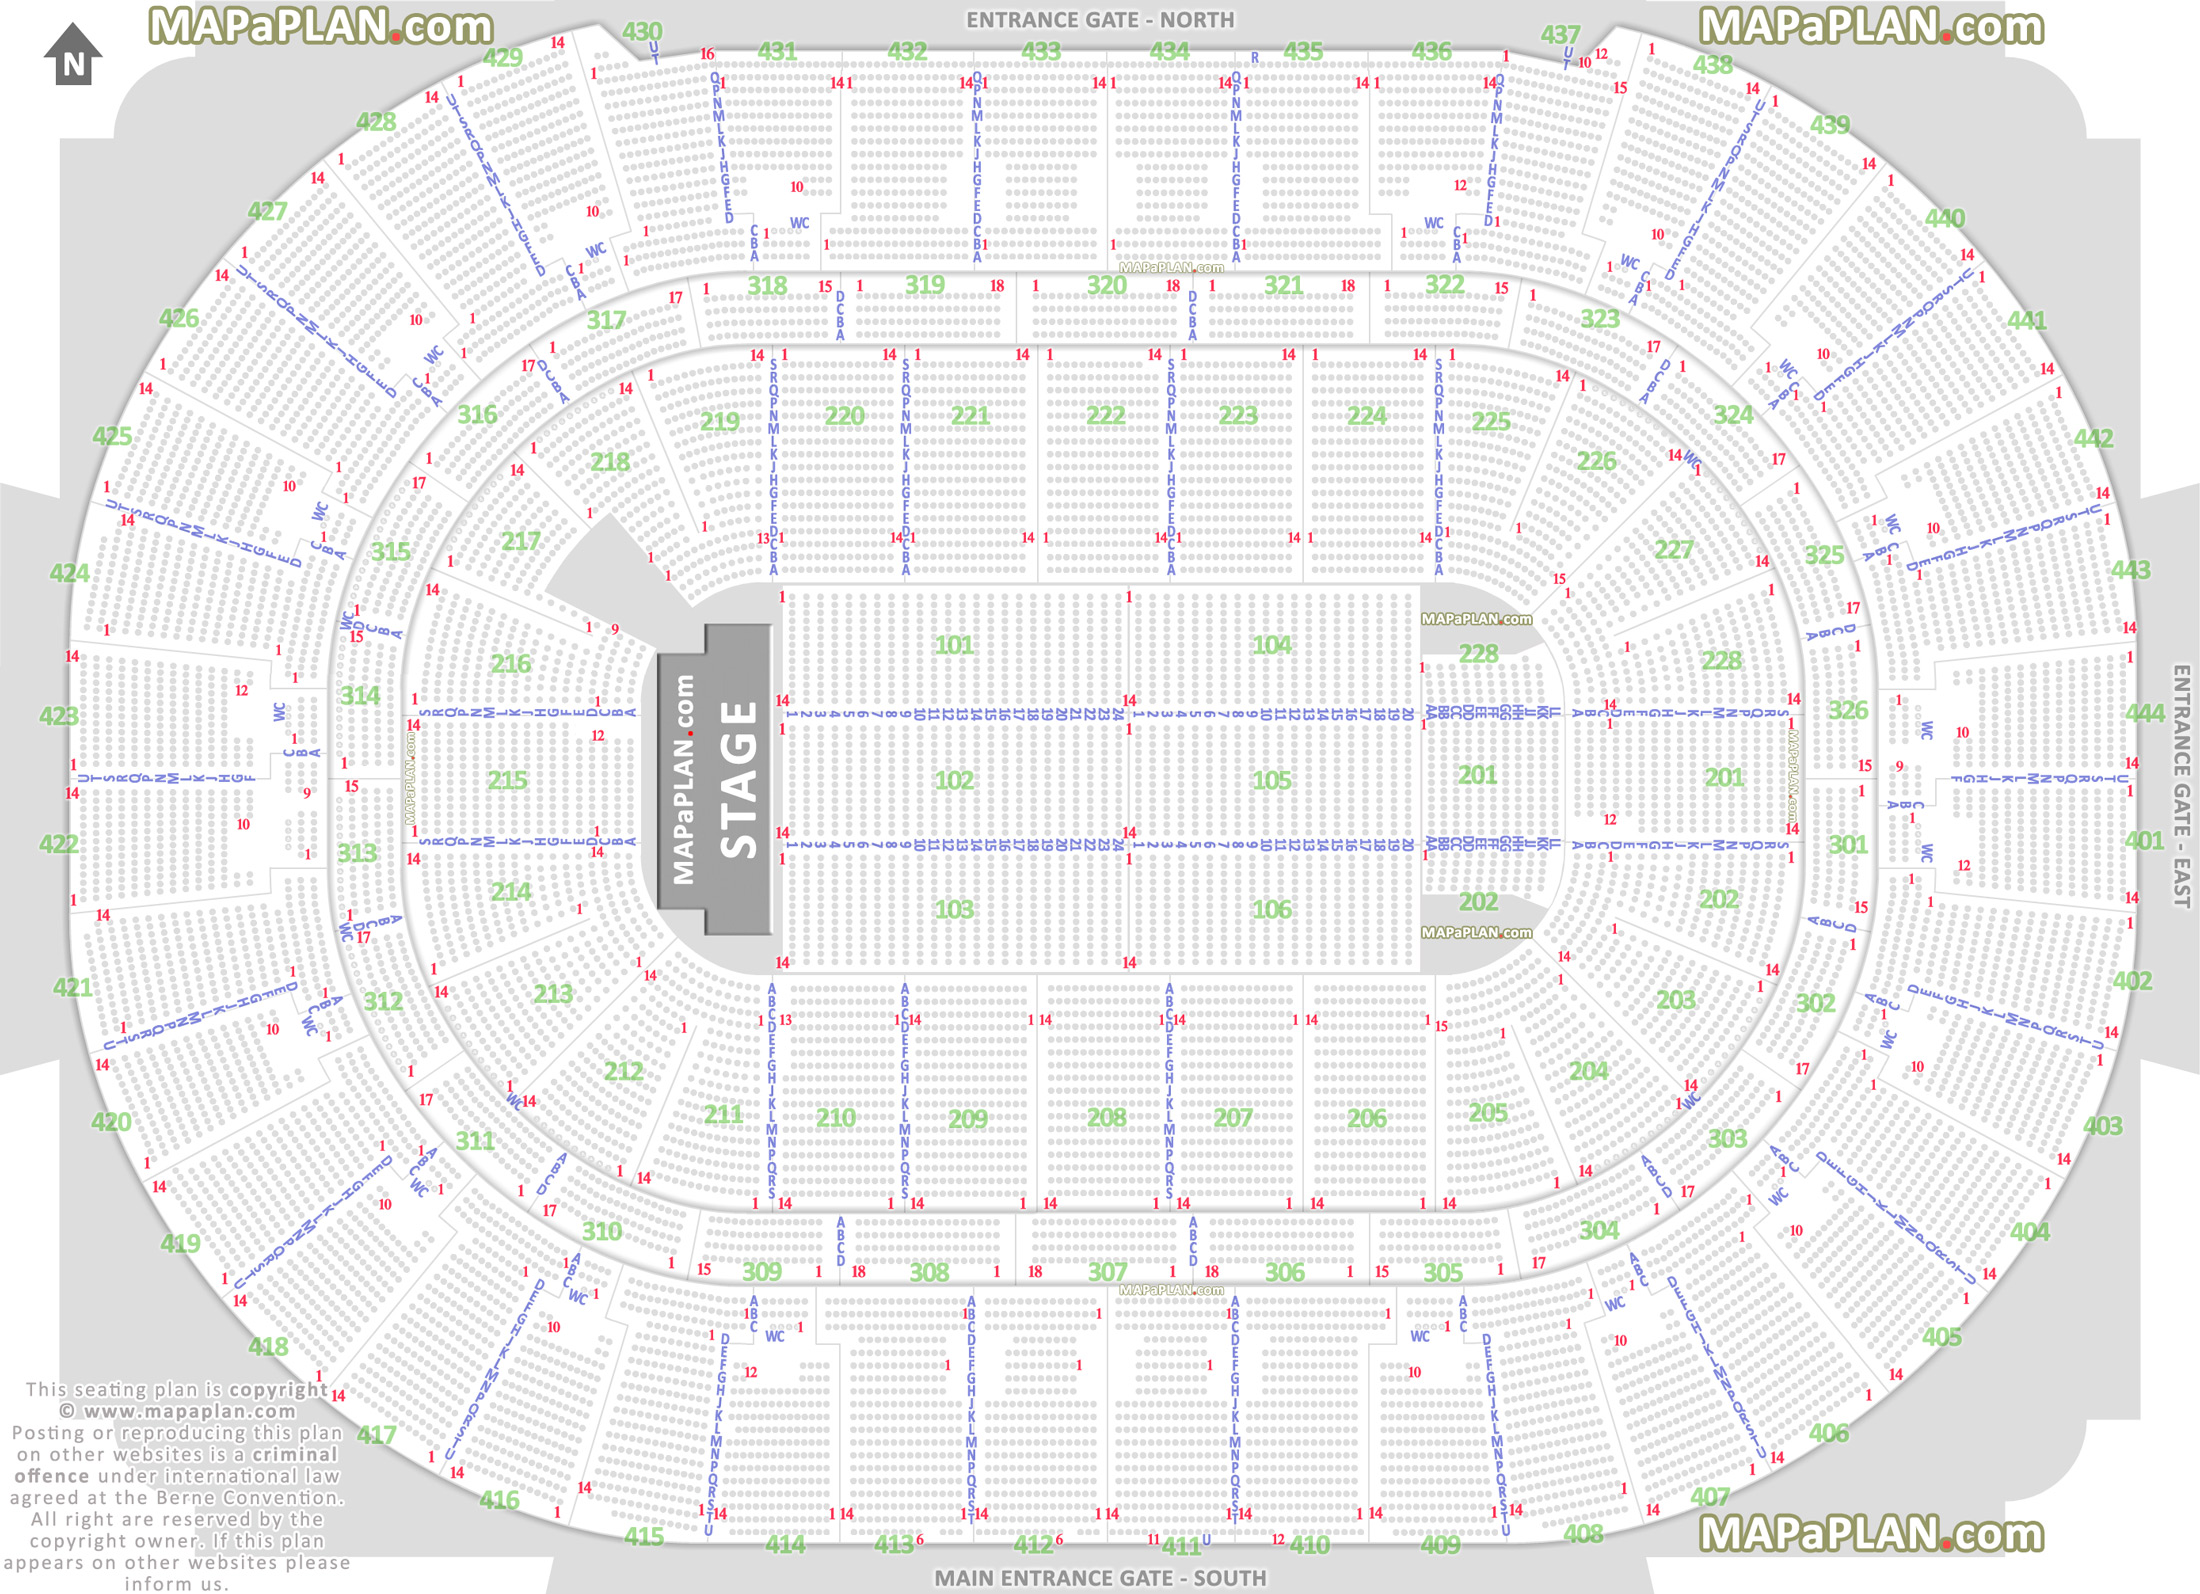 detailed seat row numbers end stage concert sections floor plan map arena plaza club terrace level layout Anaheim Honda Center seating chart